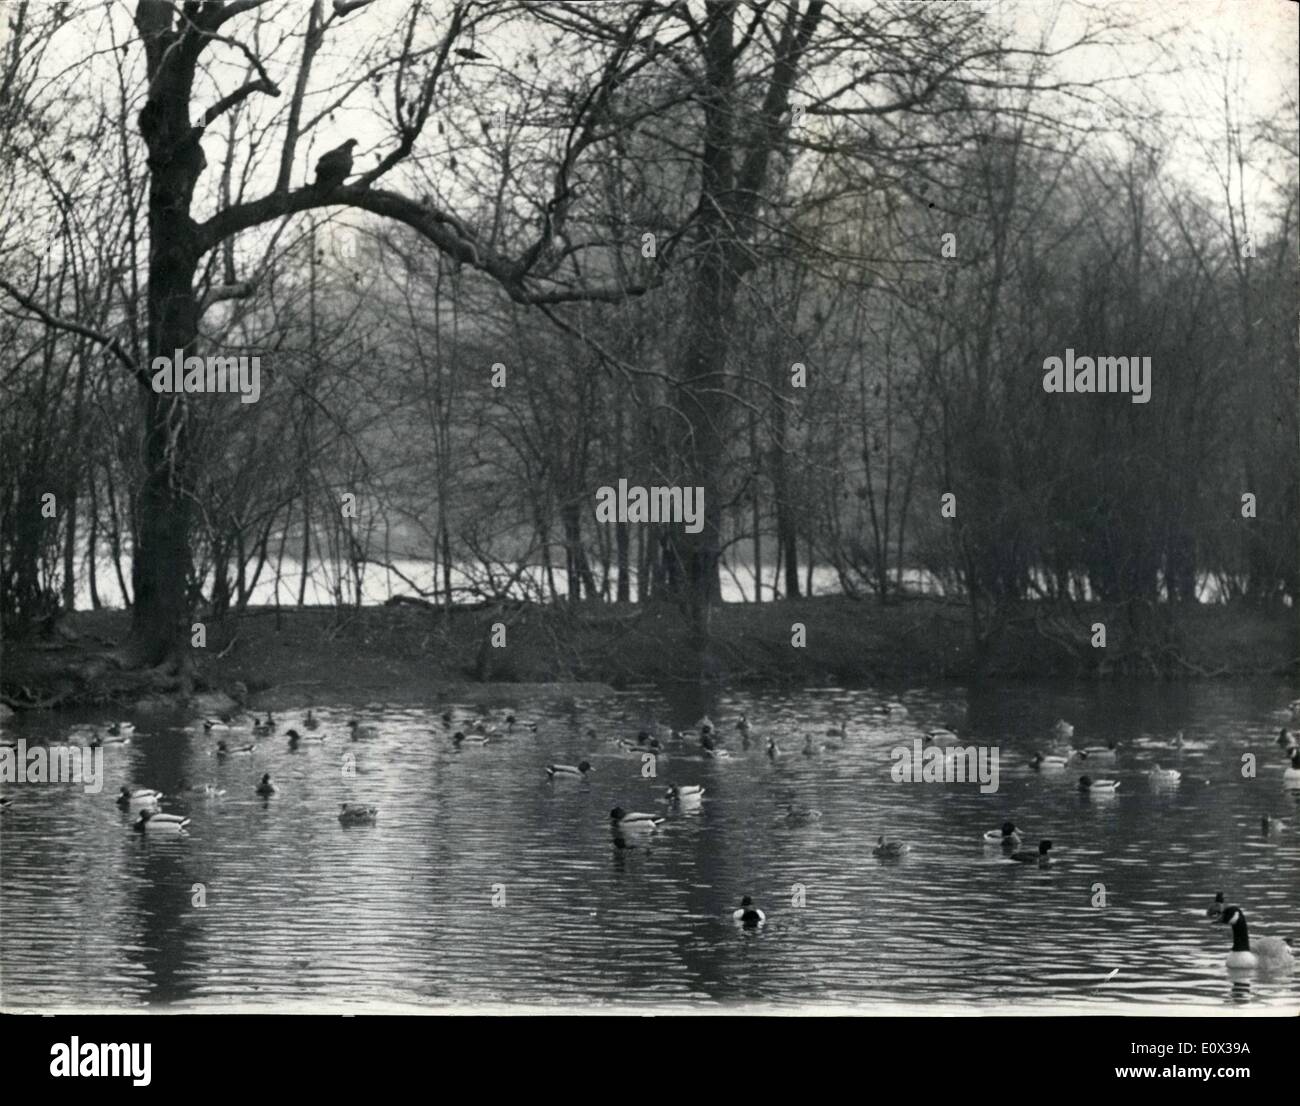 Mar. 03, 1965 - ''Goldie'' the fly-away eagle strikes again swoops on another duck in regent's park: ''Goldie'' the Golden Eagle which escaped from the London Zoo on Feb. 28th - and so far has managed to elude his captors, struck again in Regent's Park today. He dropped like a stone from his tree-top perch above the park's duckpond and landed on the back of w white Shnow goose. It dragged the bird up on the back of the Santuary - and at the vital momenta shout went up from the crowd. Goldie released his prey and flew back to his tree-top perch Stock Photo